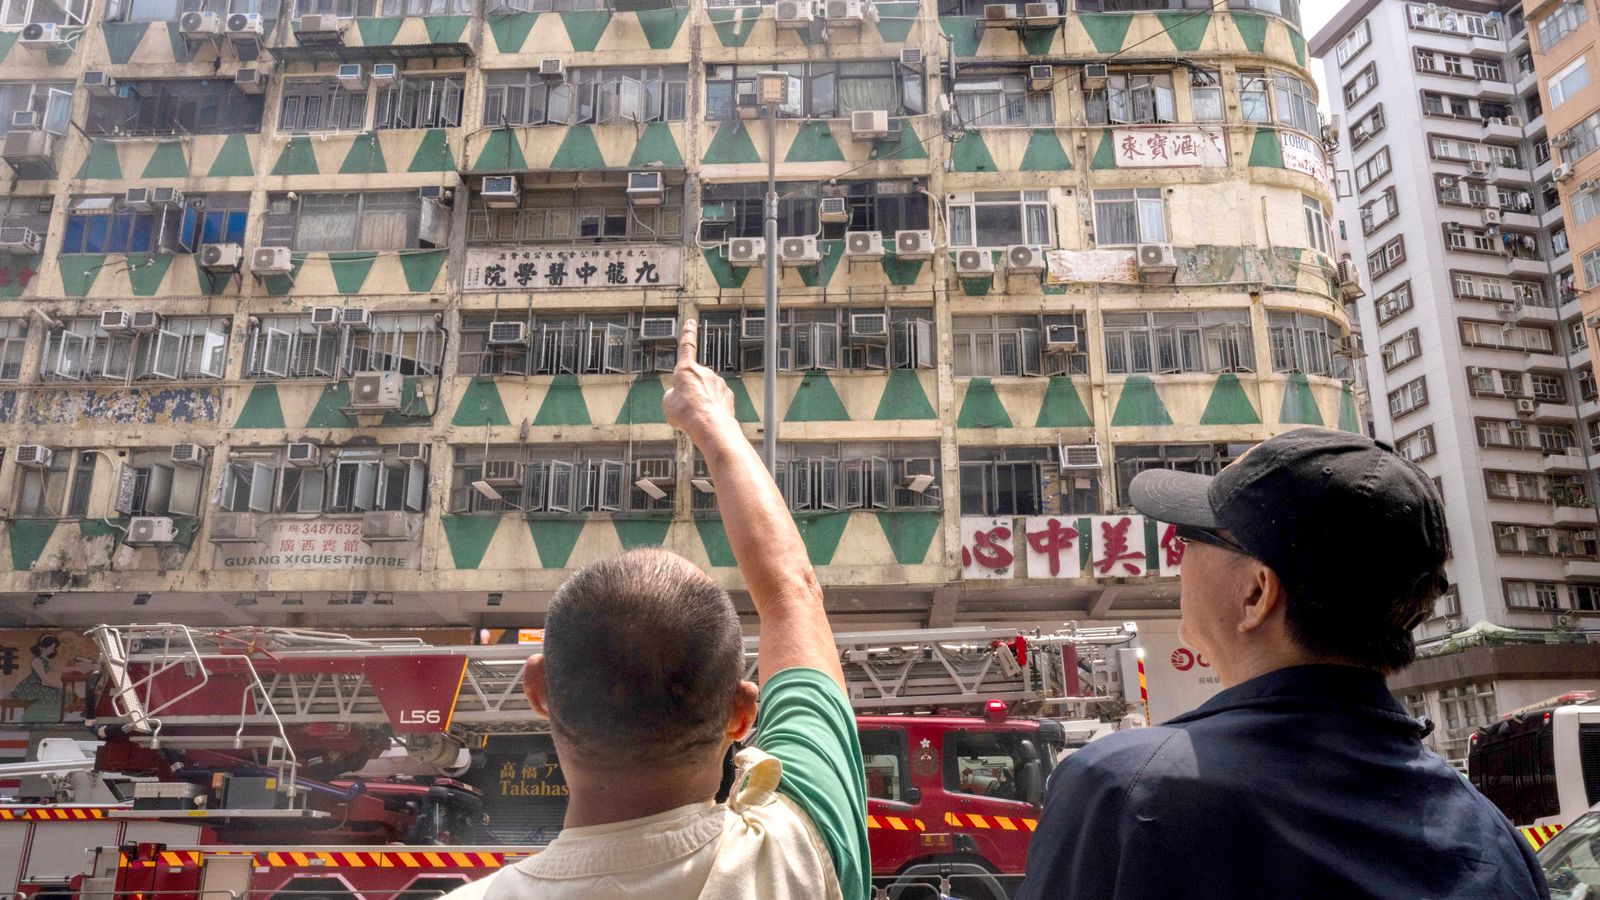 Hong Kong fire: Five dead and 27 injured after blaze in apartment building 